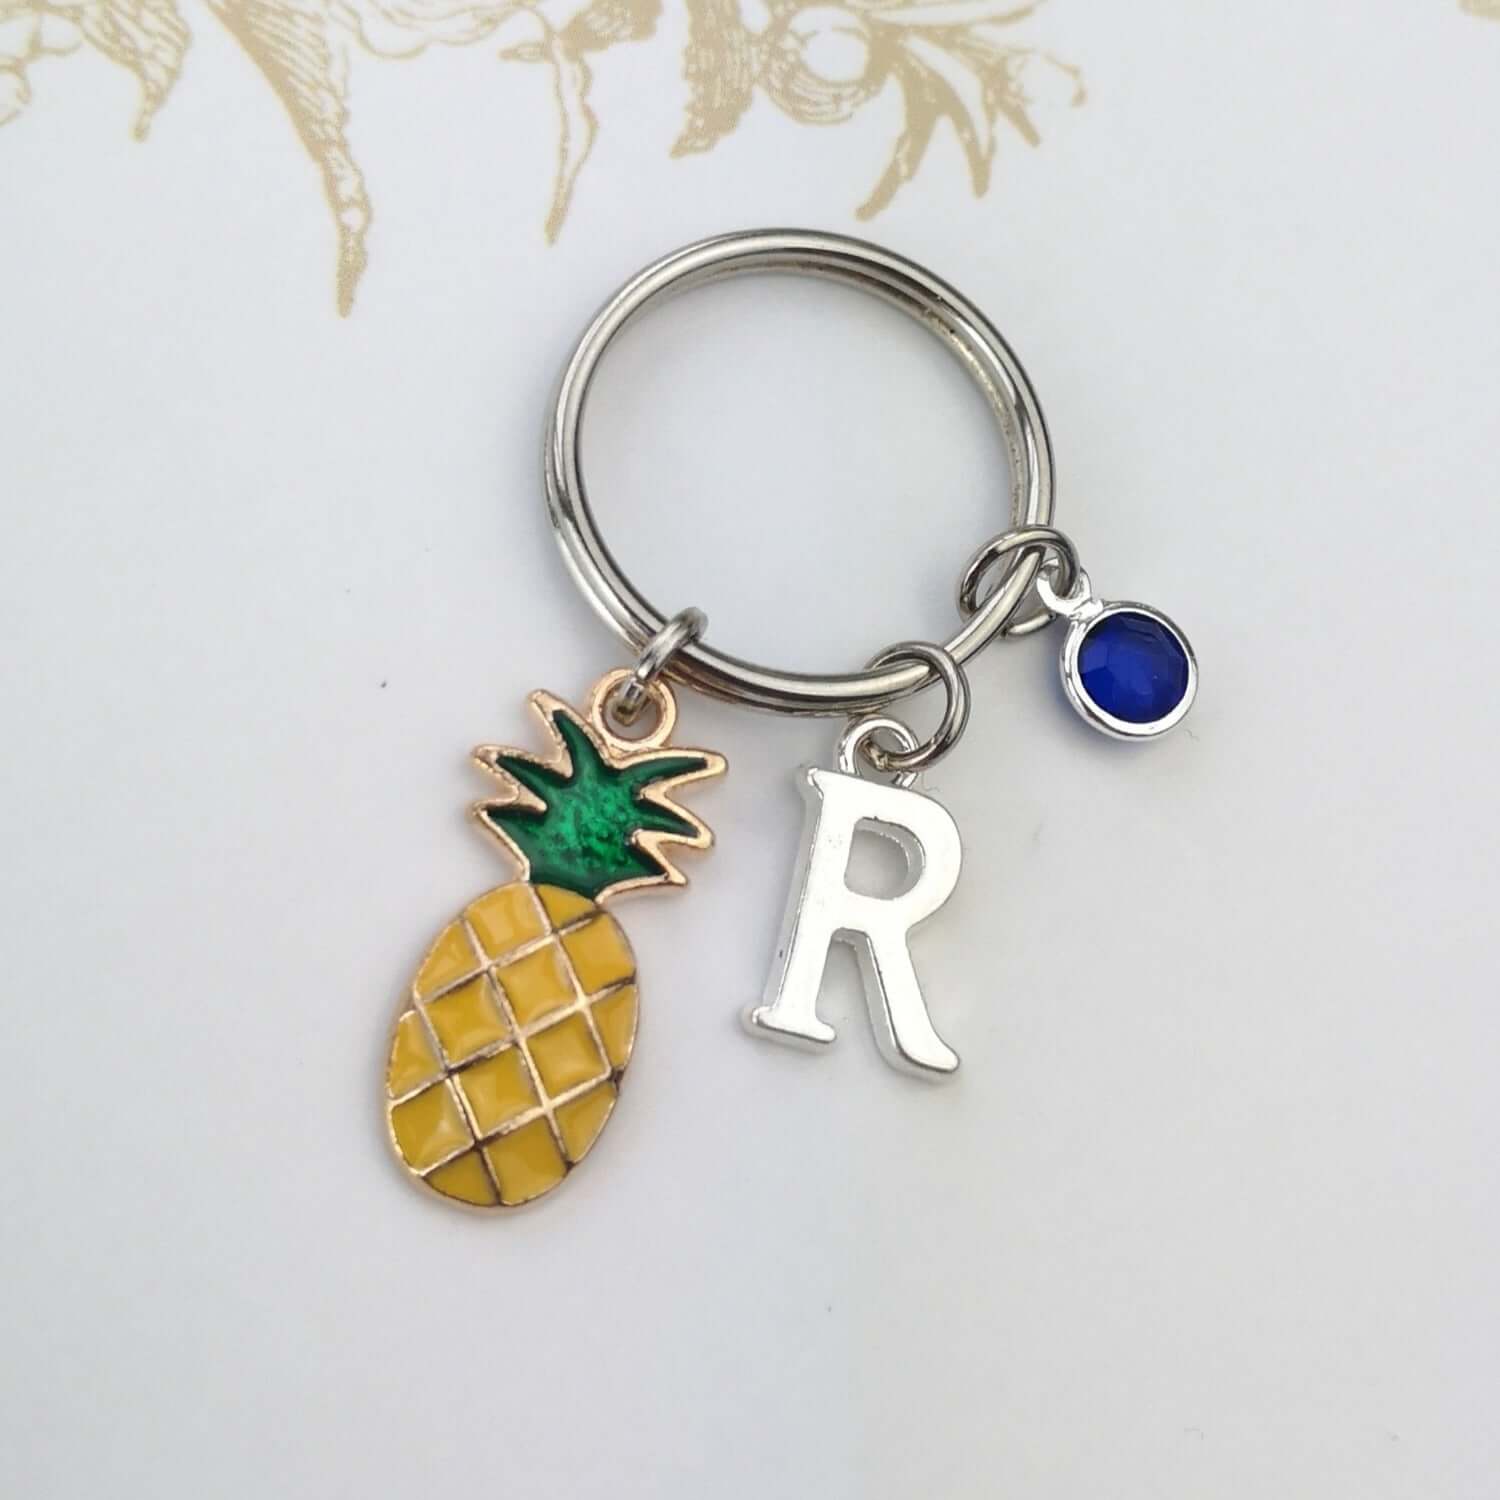 Personalised pineapple keyring with initial and birthstone